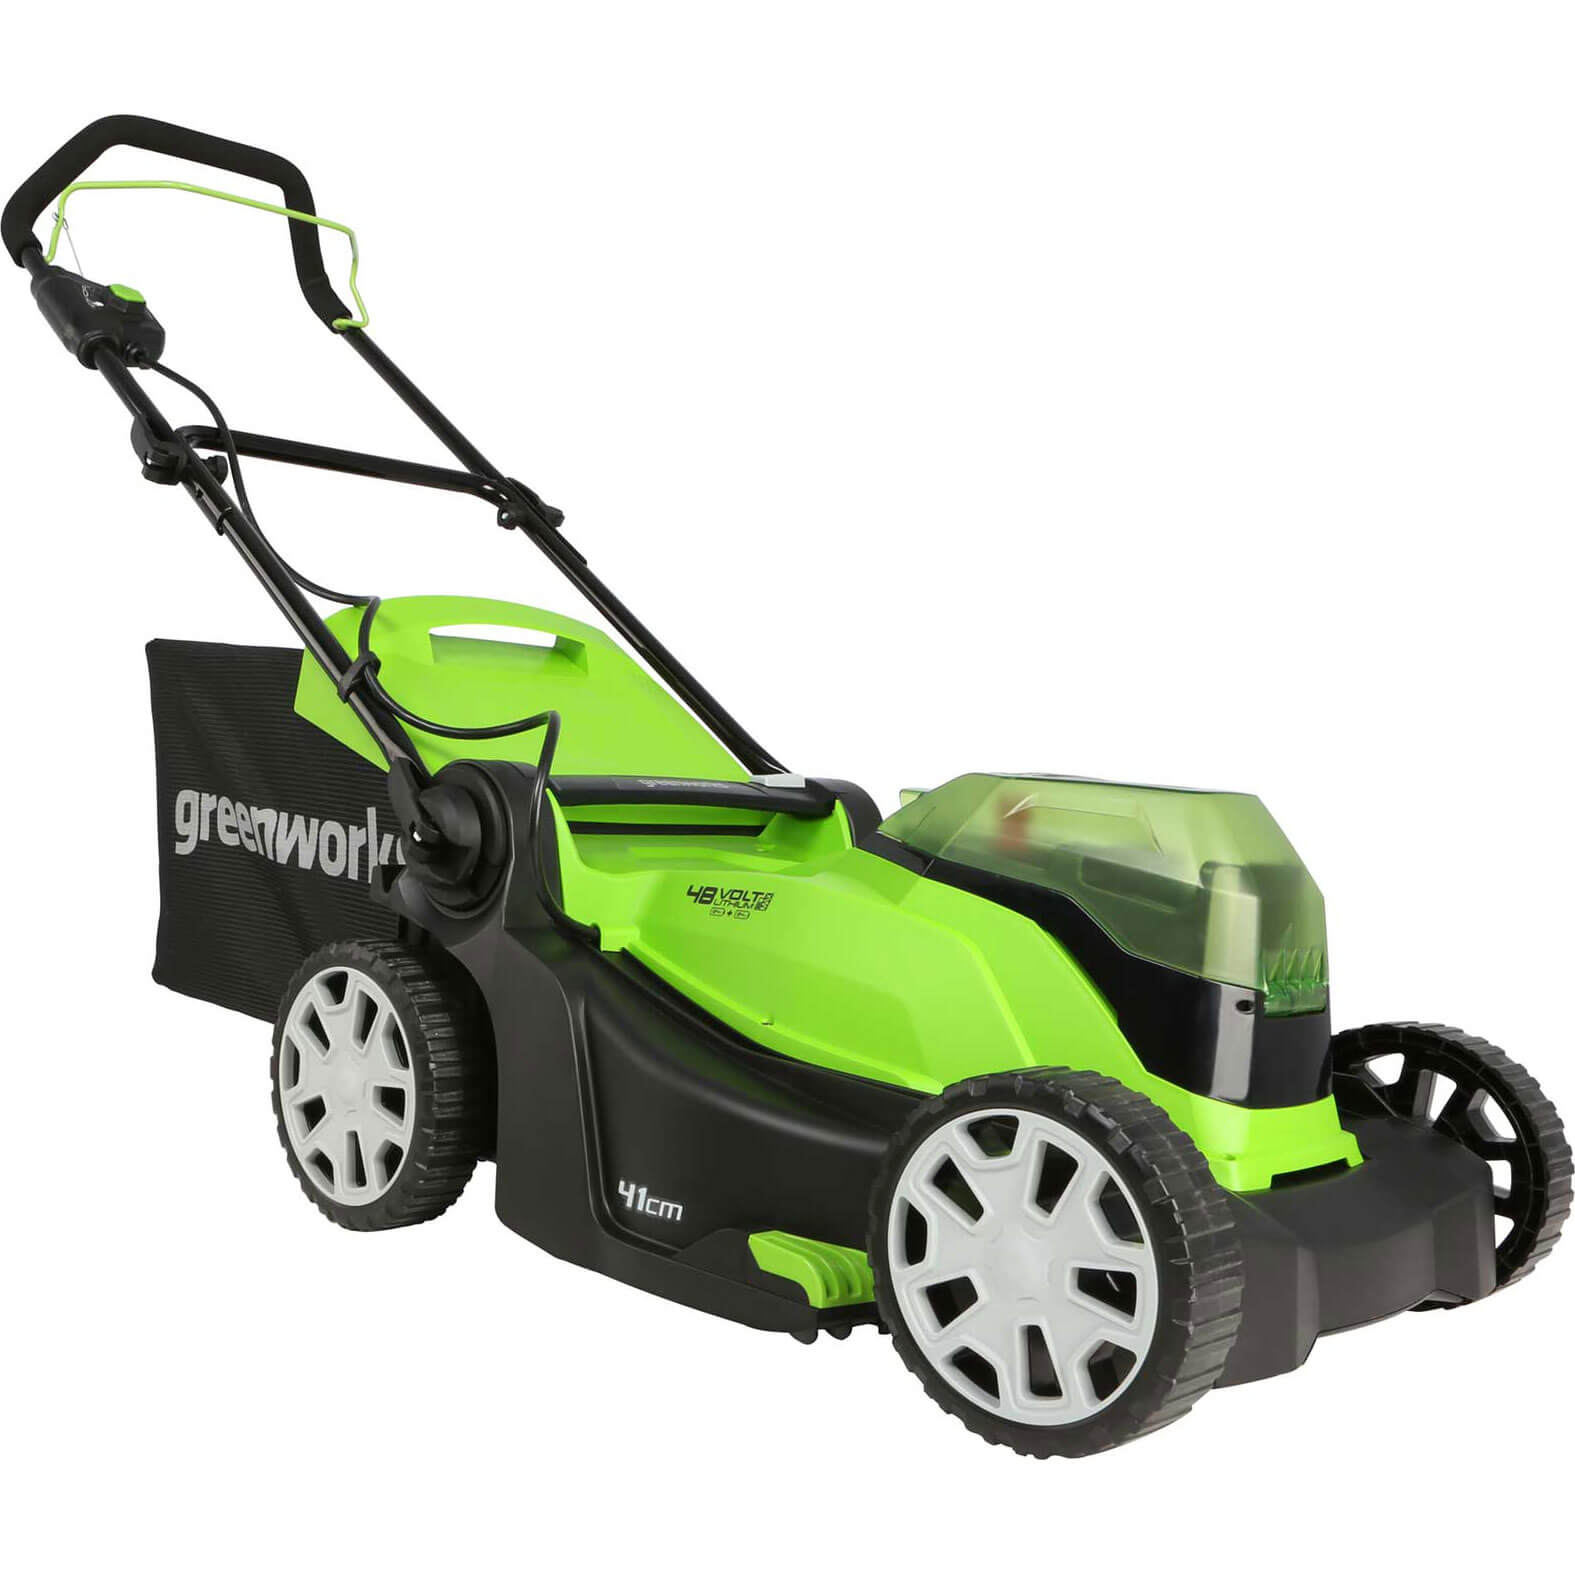 Greenworks G24X2LM41 48v Cordless Rotary Lawnmower 410mm No Batteries No Charger FREE Grass Trimmer Worth 70